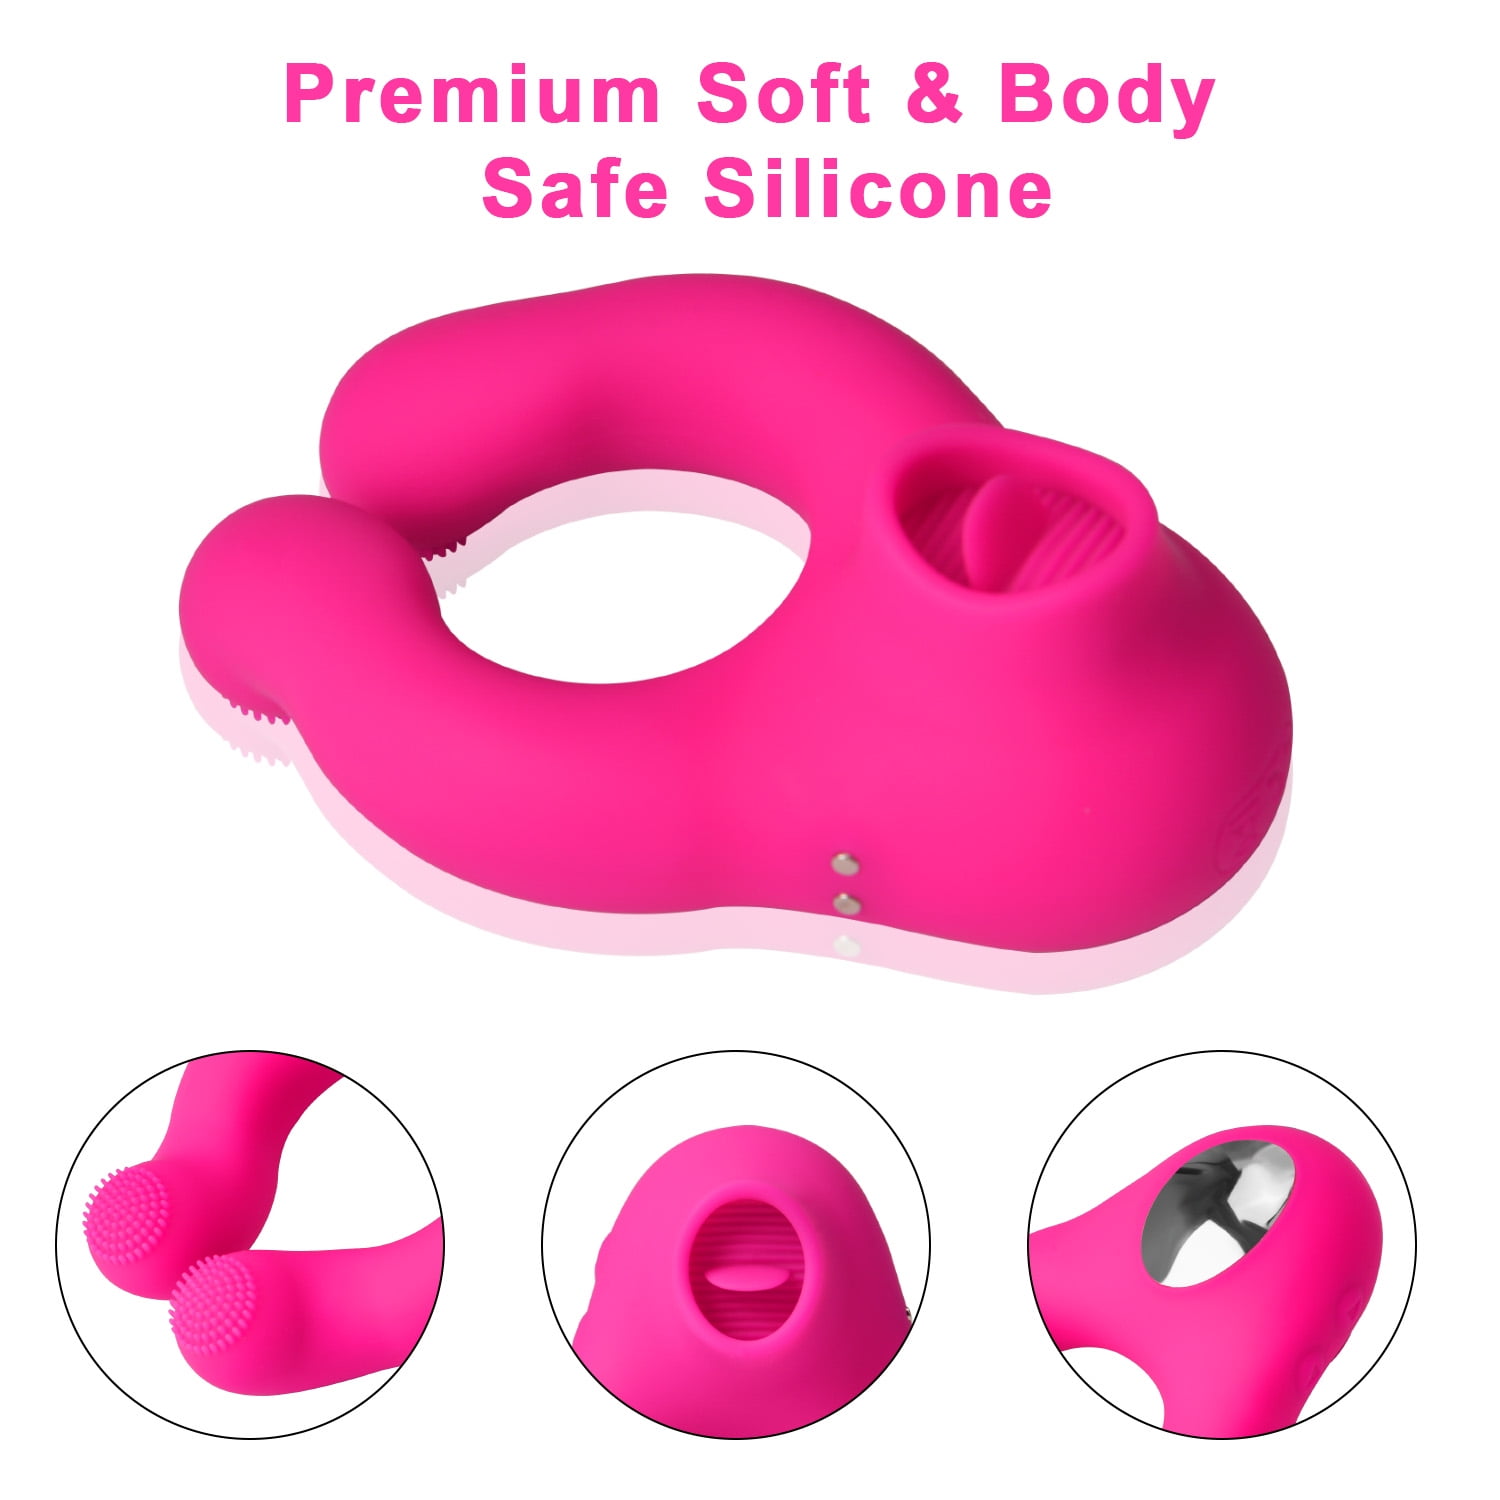 Remote Control Couple Vibrator,Clitoral Tongue Licking Vibrator with Penis Ring,Clitoral Vibrator Stimulator with 7 Vibrating and Licking Modes,Adult Sex Toys for Women Pleasure picture